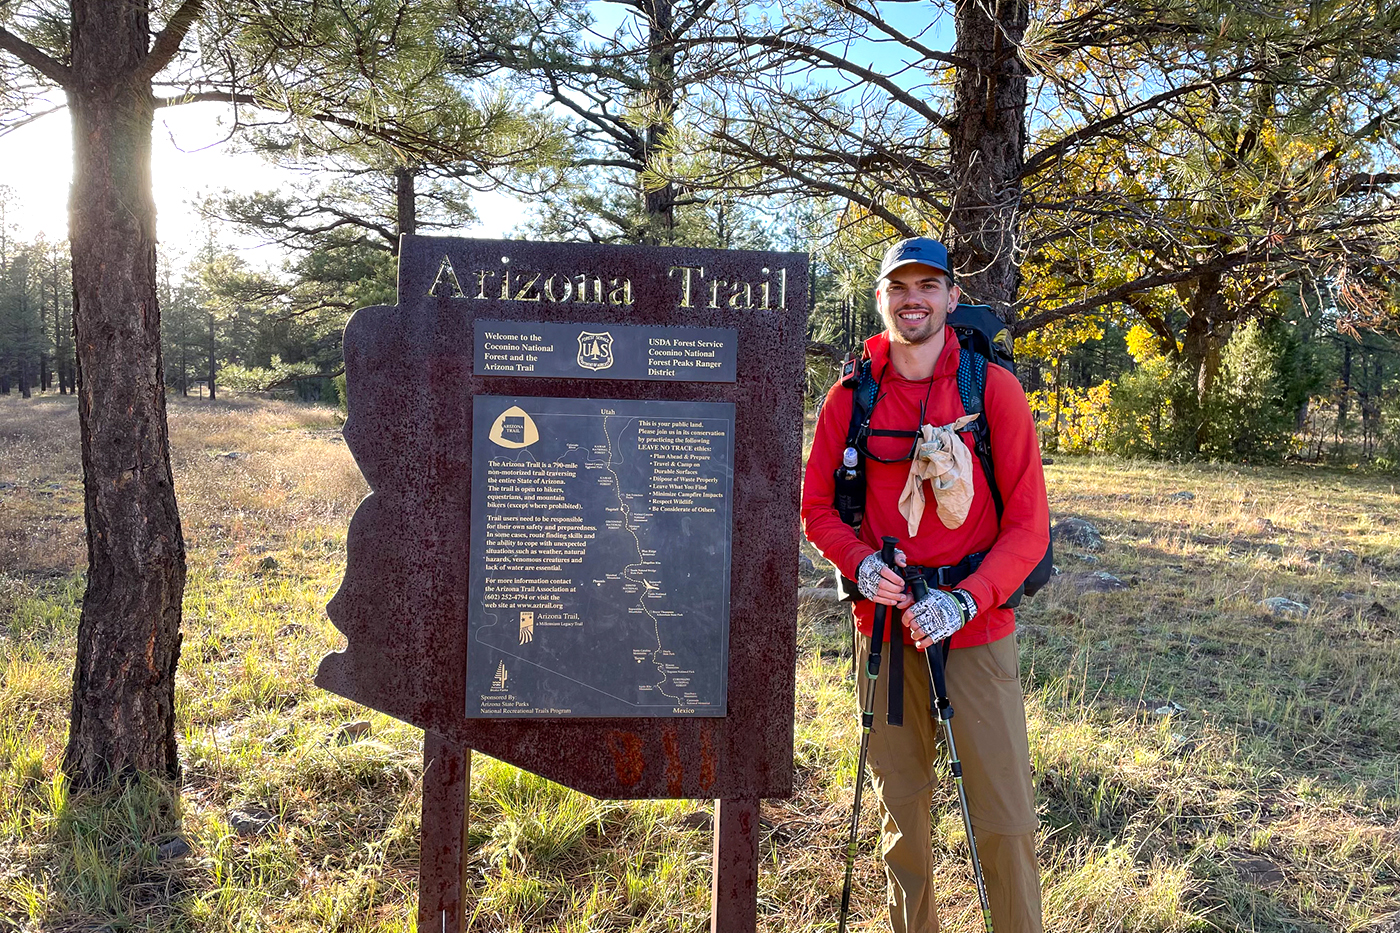 Michael Nelson stands with hiking poles in front of an Arizona Trail sign.